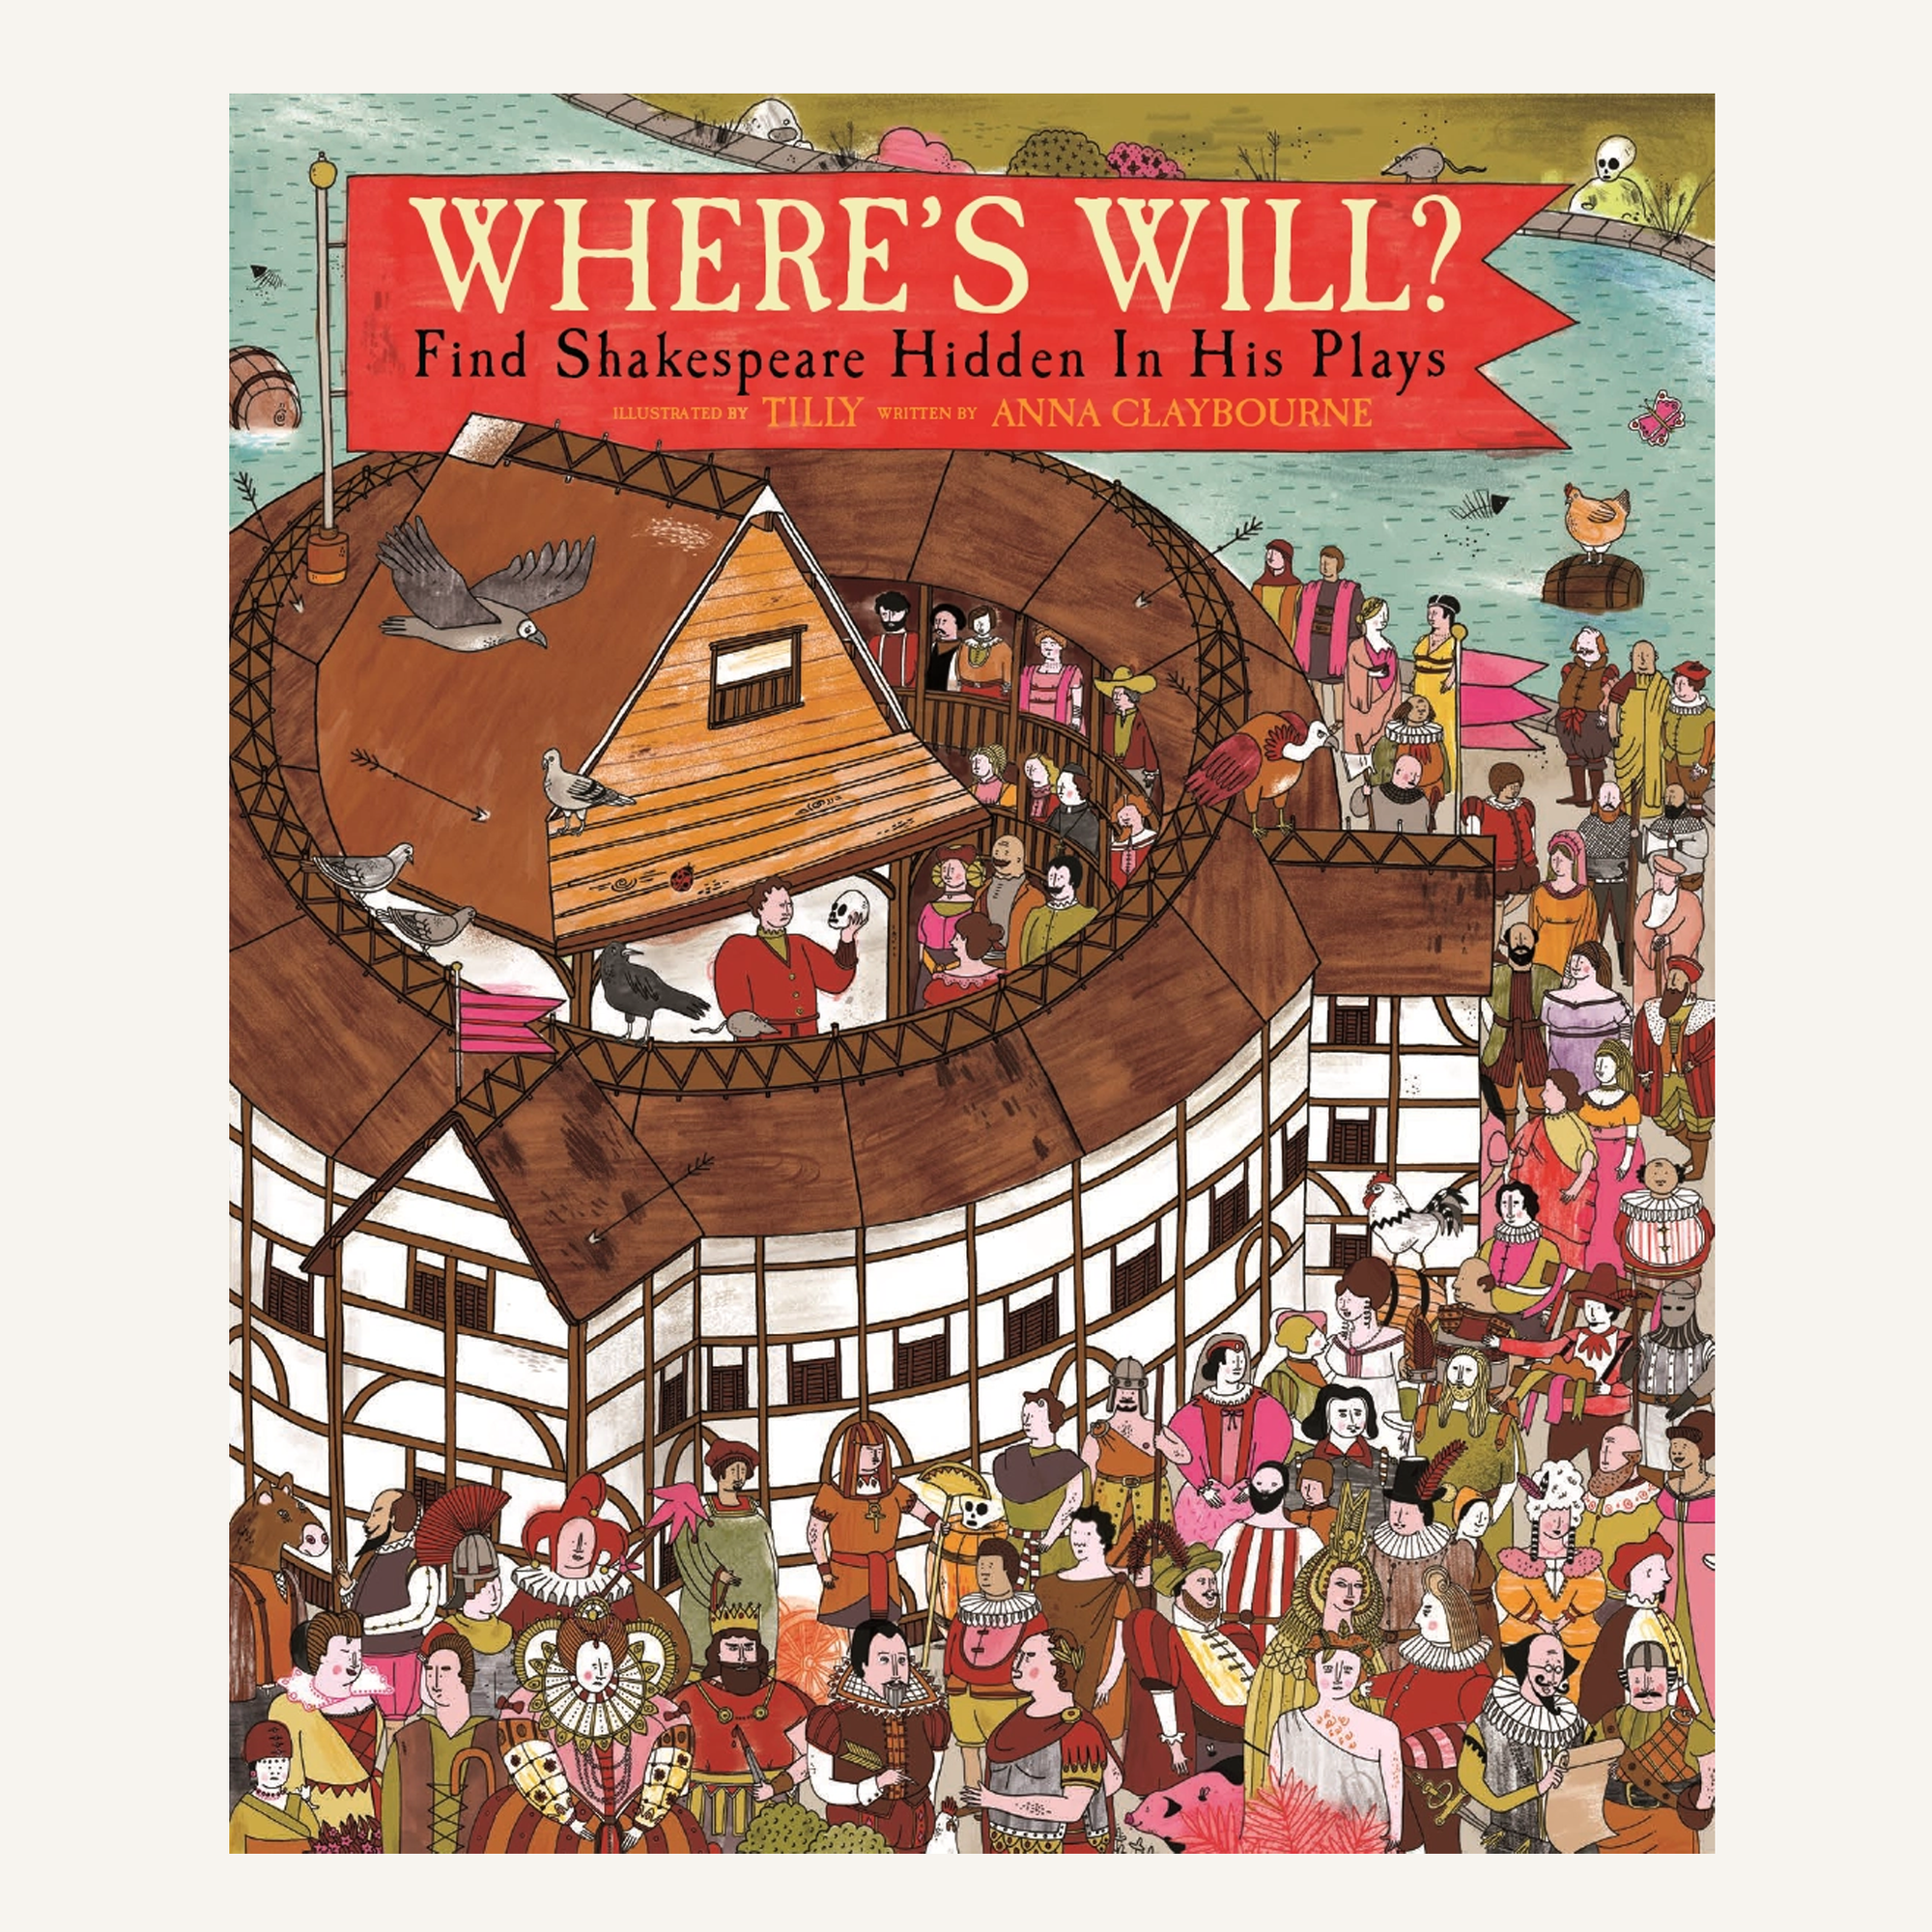 Where's Will? Find Shakespeare Hidden in His Plays